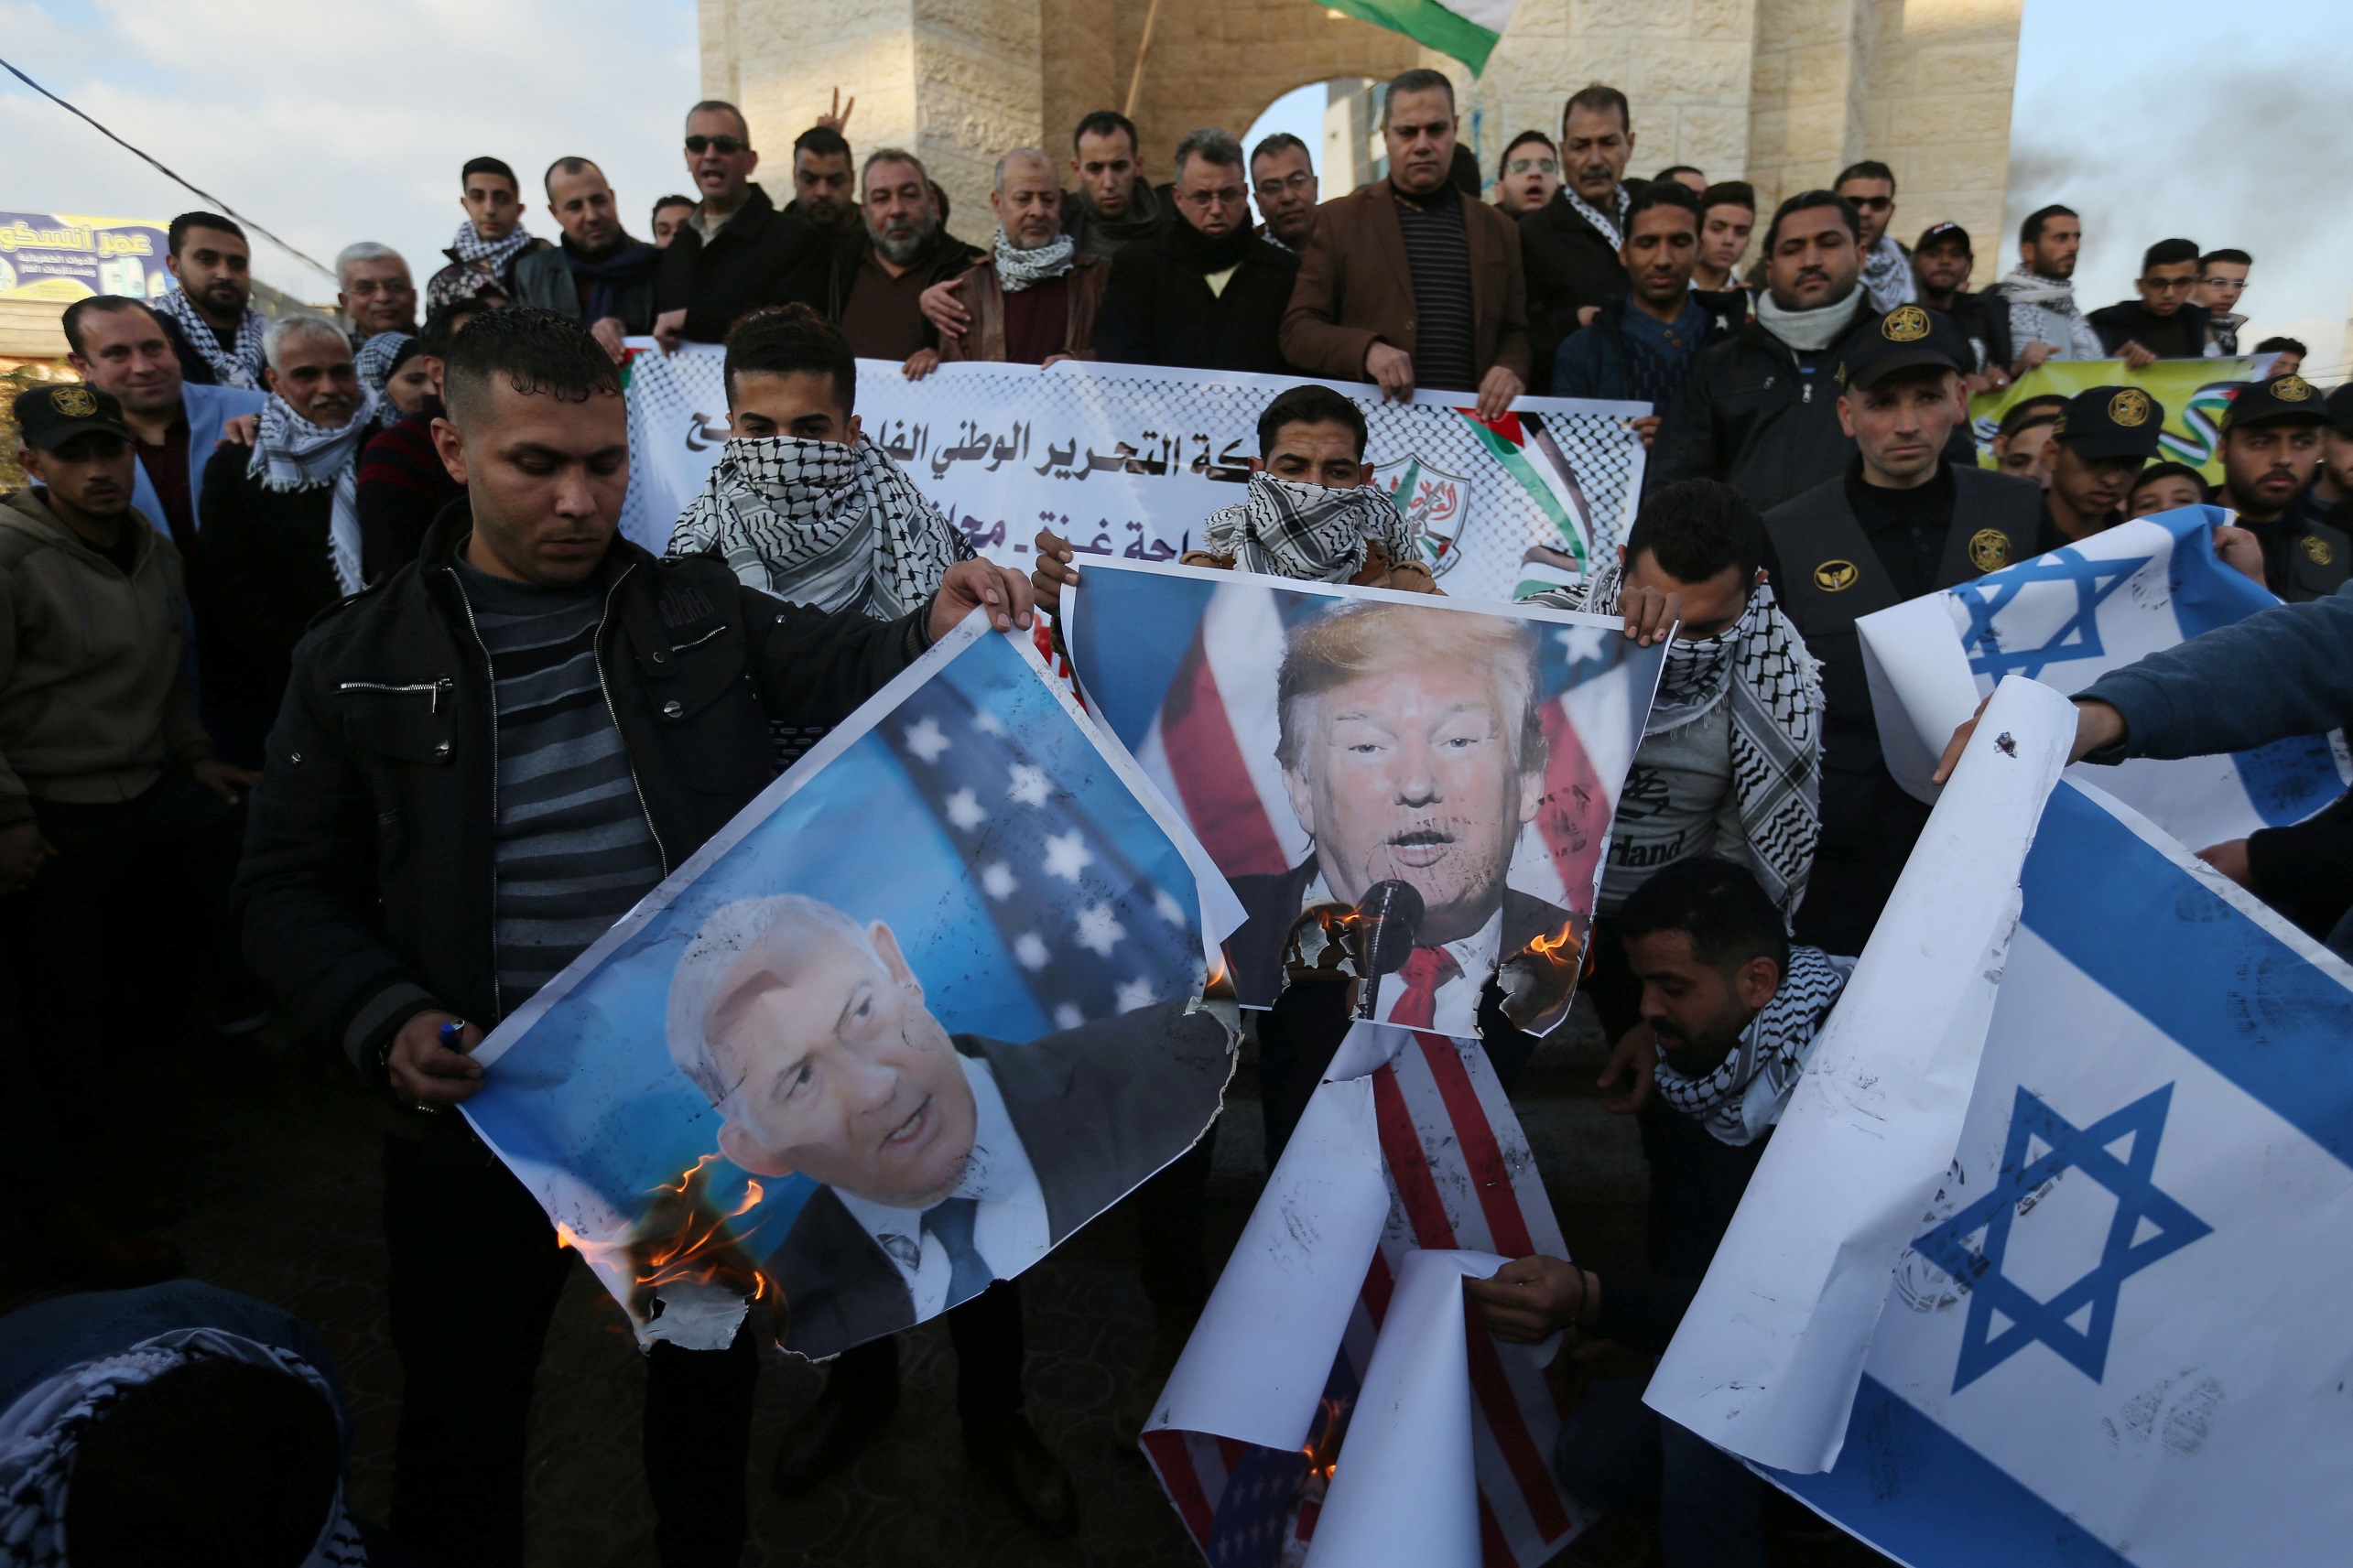 Palestinian demonstrators burn pictures depicting U.S. President Donald Trump and Israeli Prime Minister Benjamin Netanyahu, and repsentations of U.S and Israeli flags during a protest against the U.S. President Donald Trump's Middle East peace plan, in the southern Gaza Strip January 29, 2020. REUTERS/Ibraheem Abu Mustafa